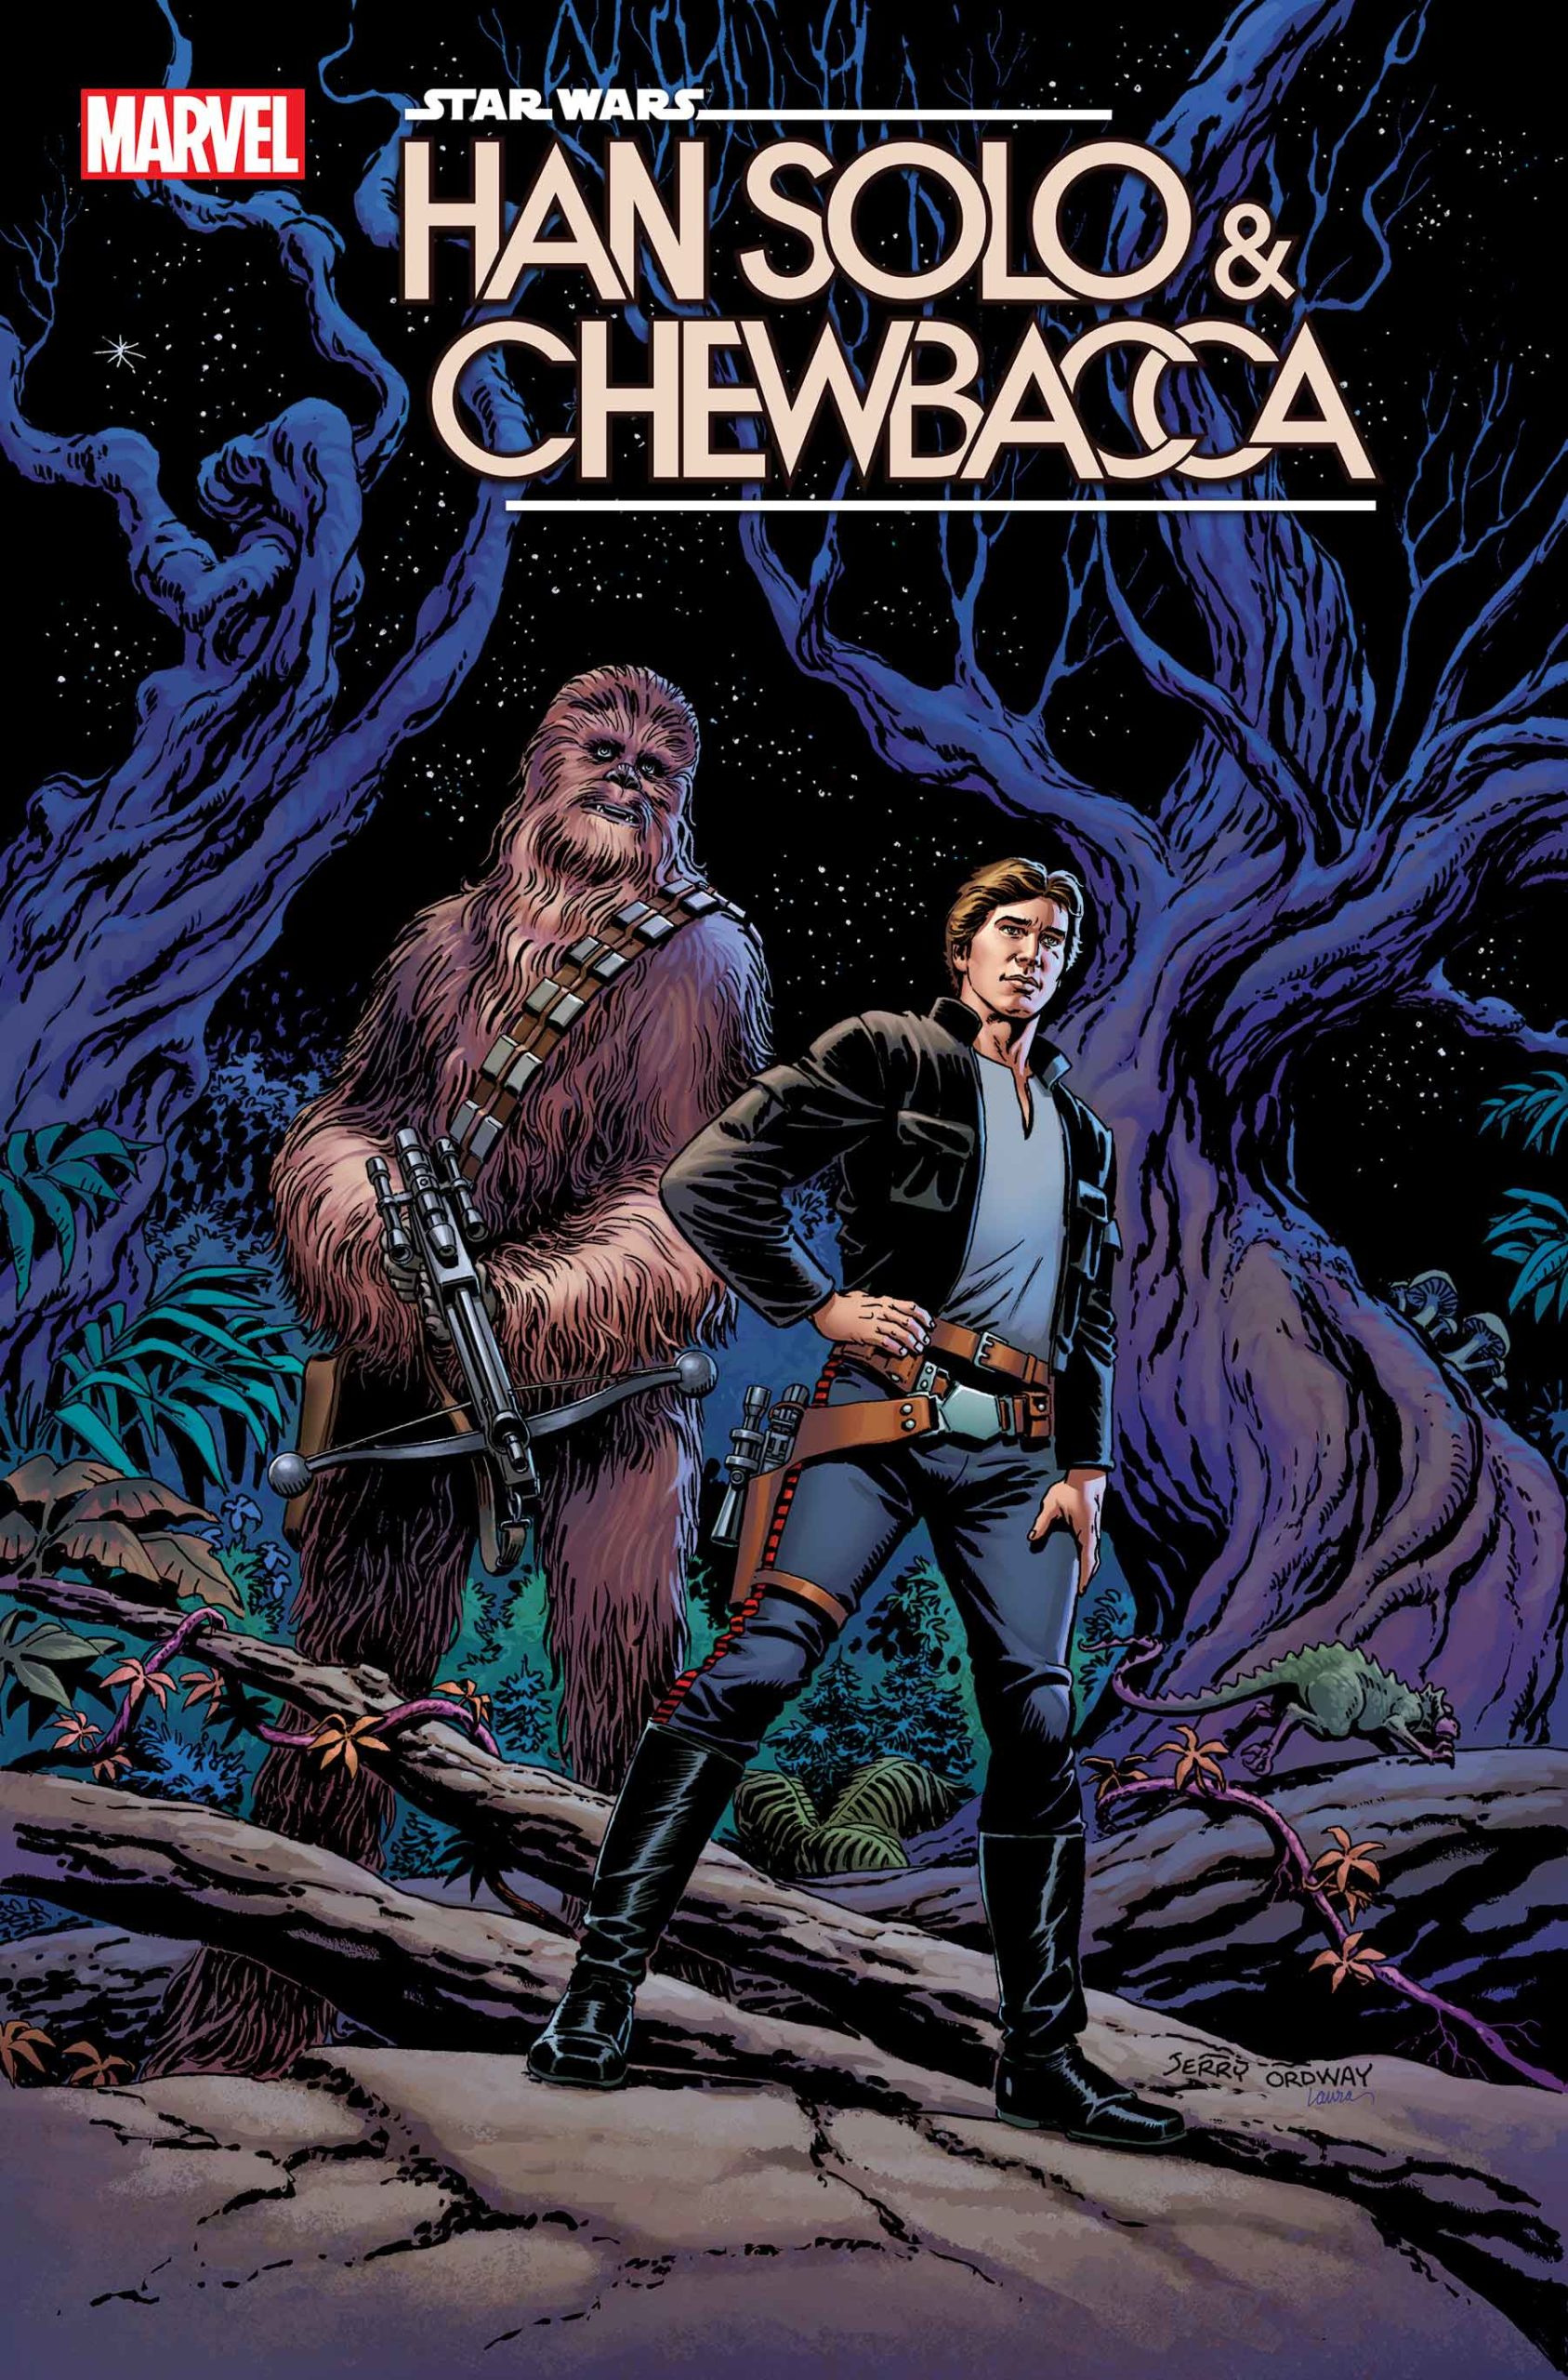 Han Solo & Chewbacca #8 (Jerry Ordway Variant Cover) (28.12.2022)